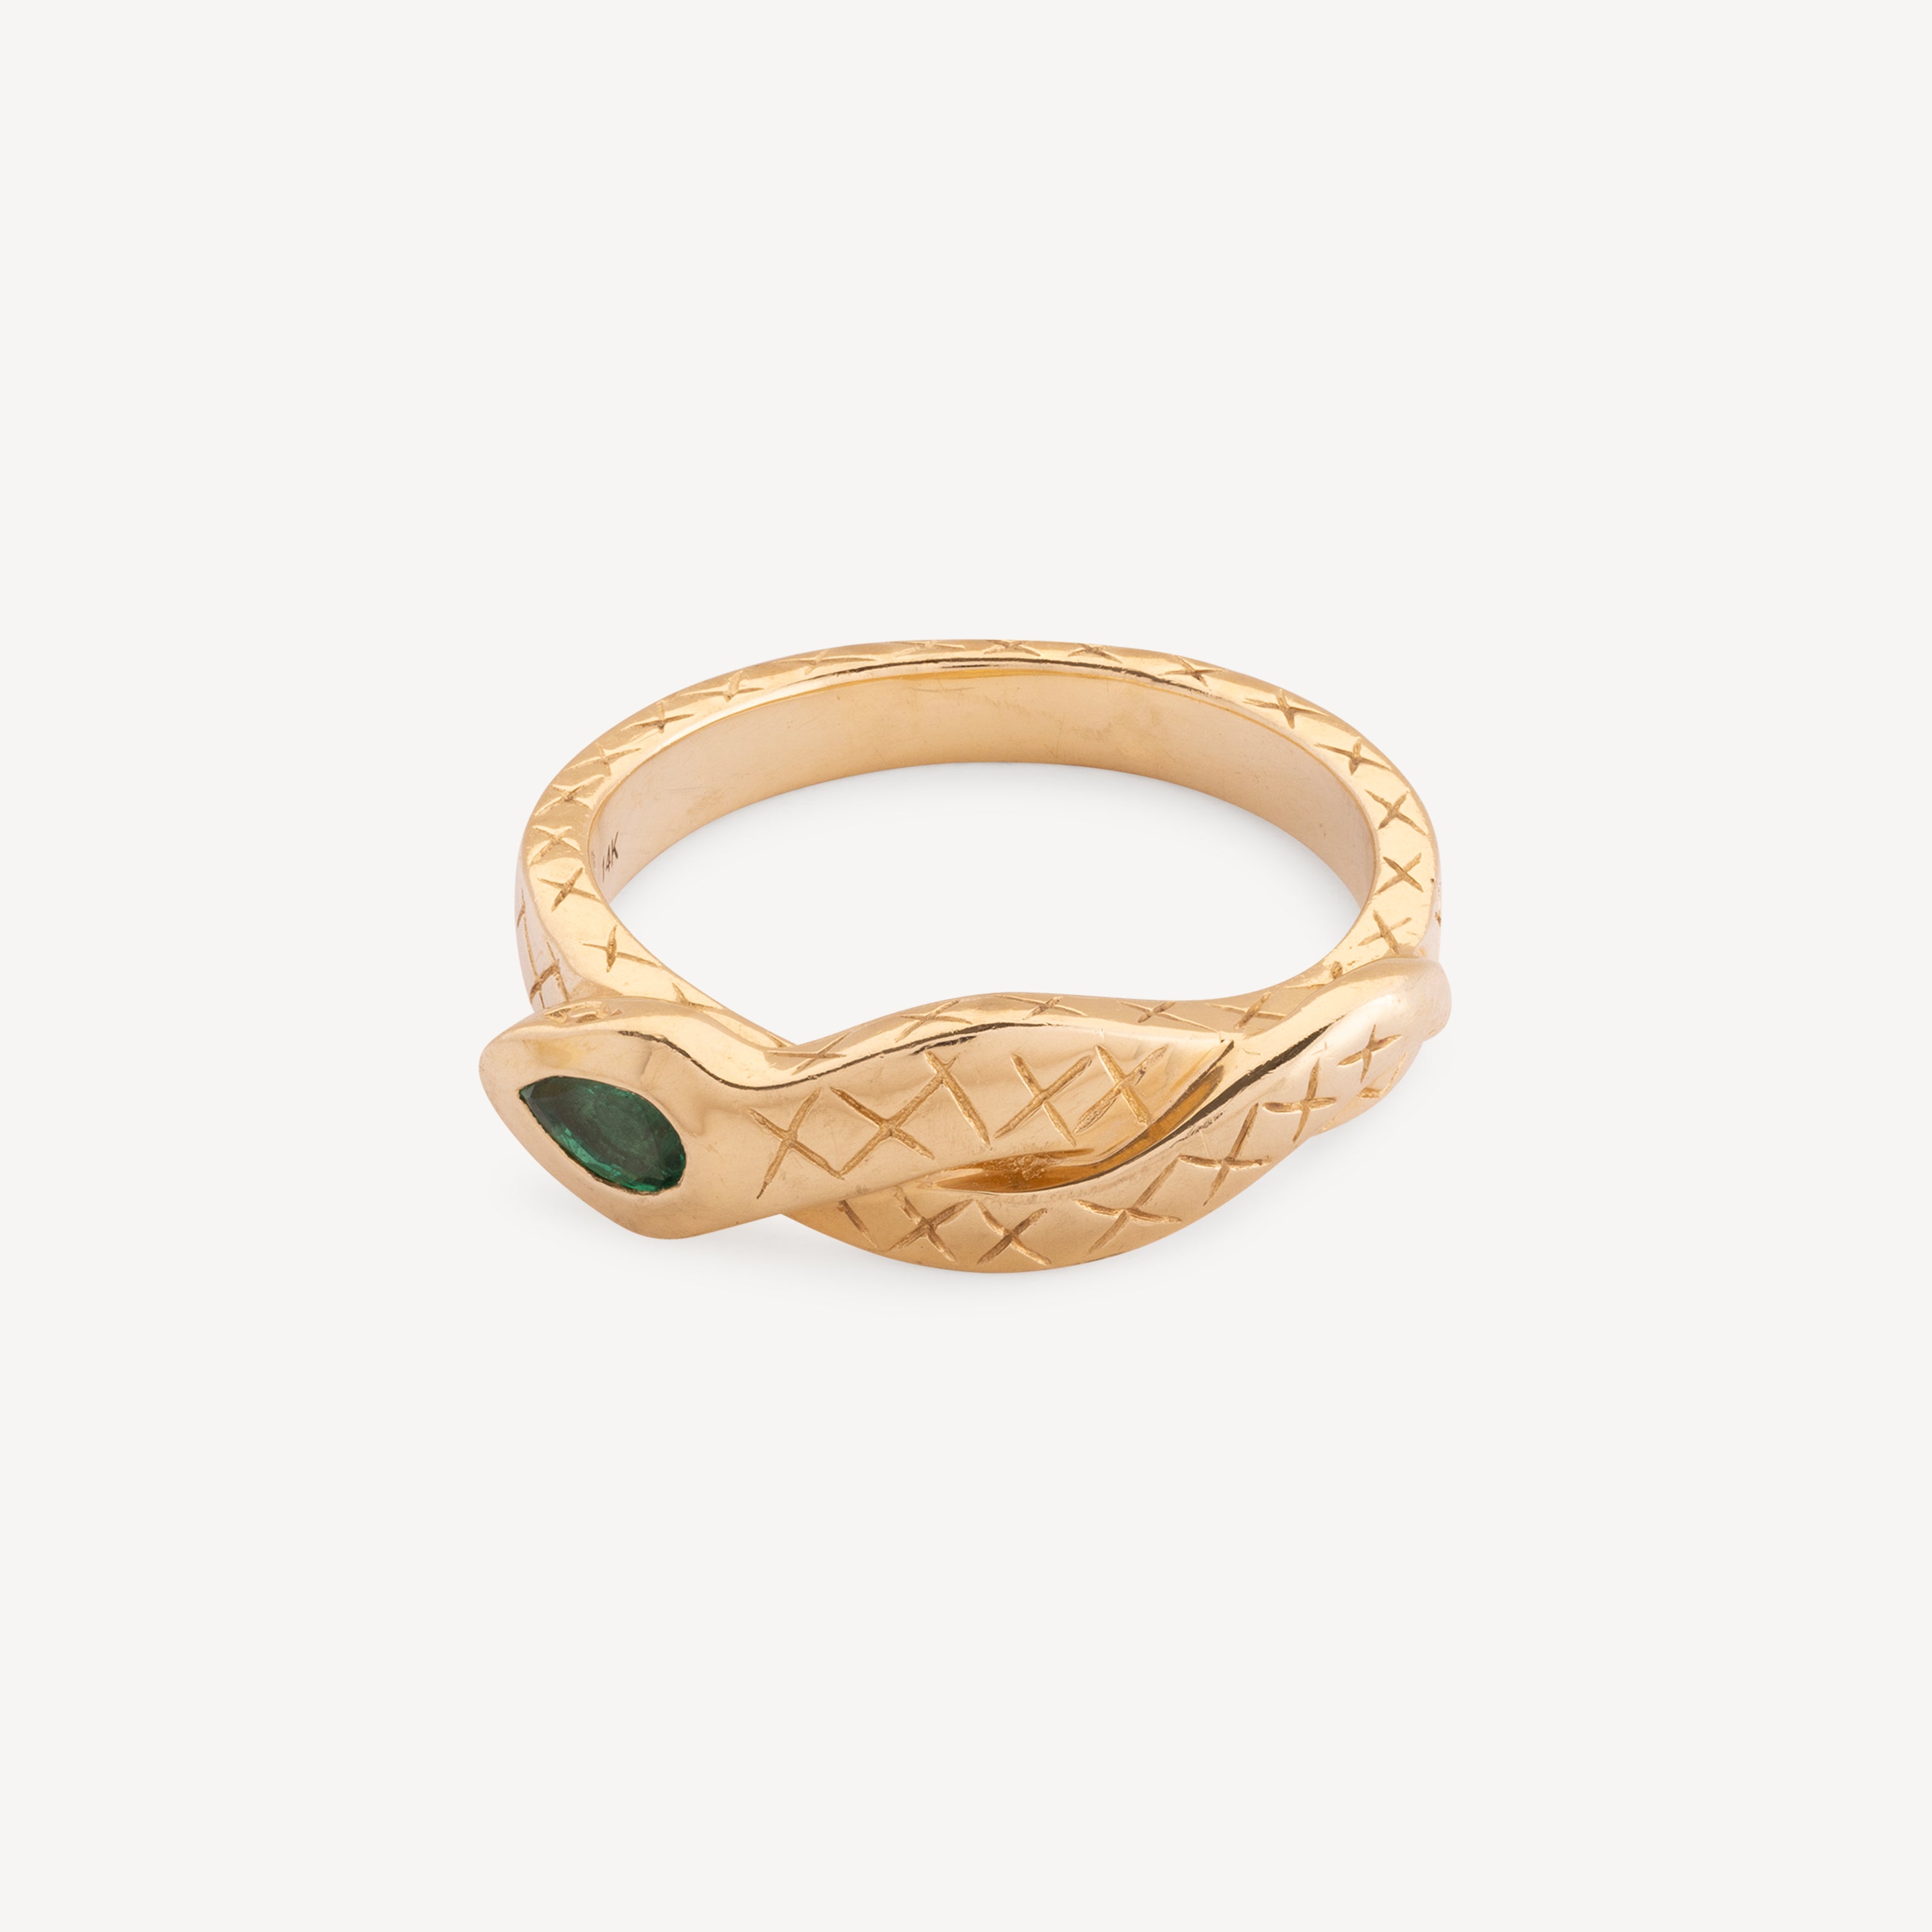 Sophia Serpent with Pear Emerald Ring